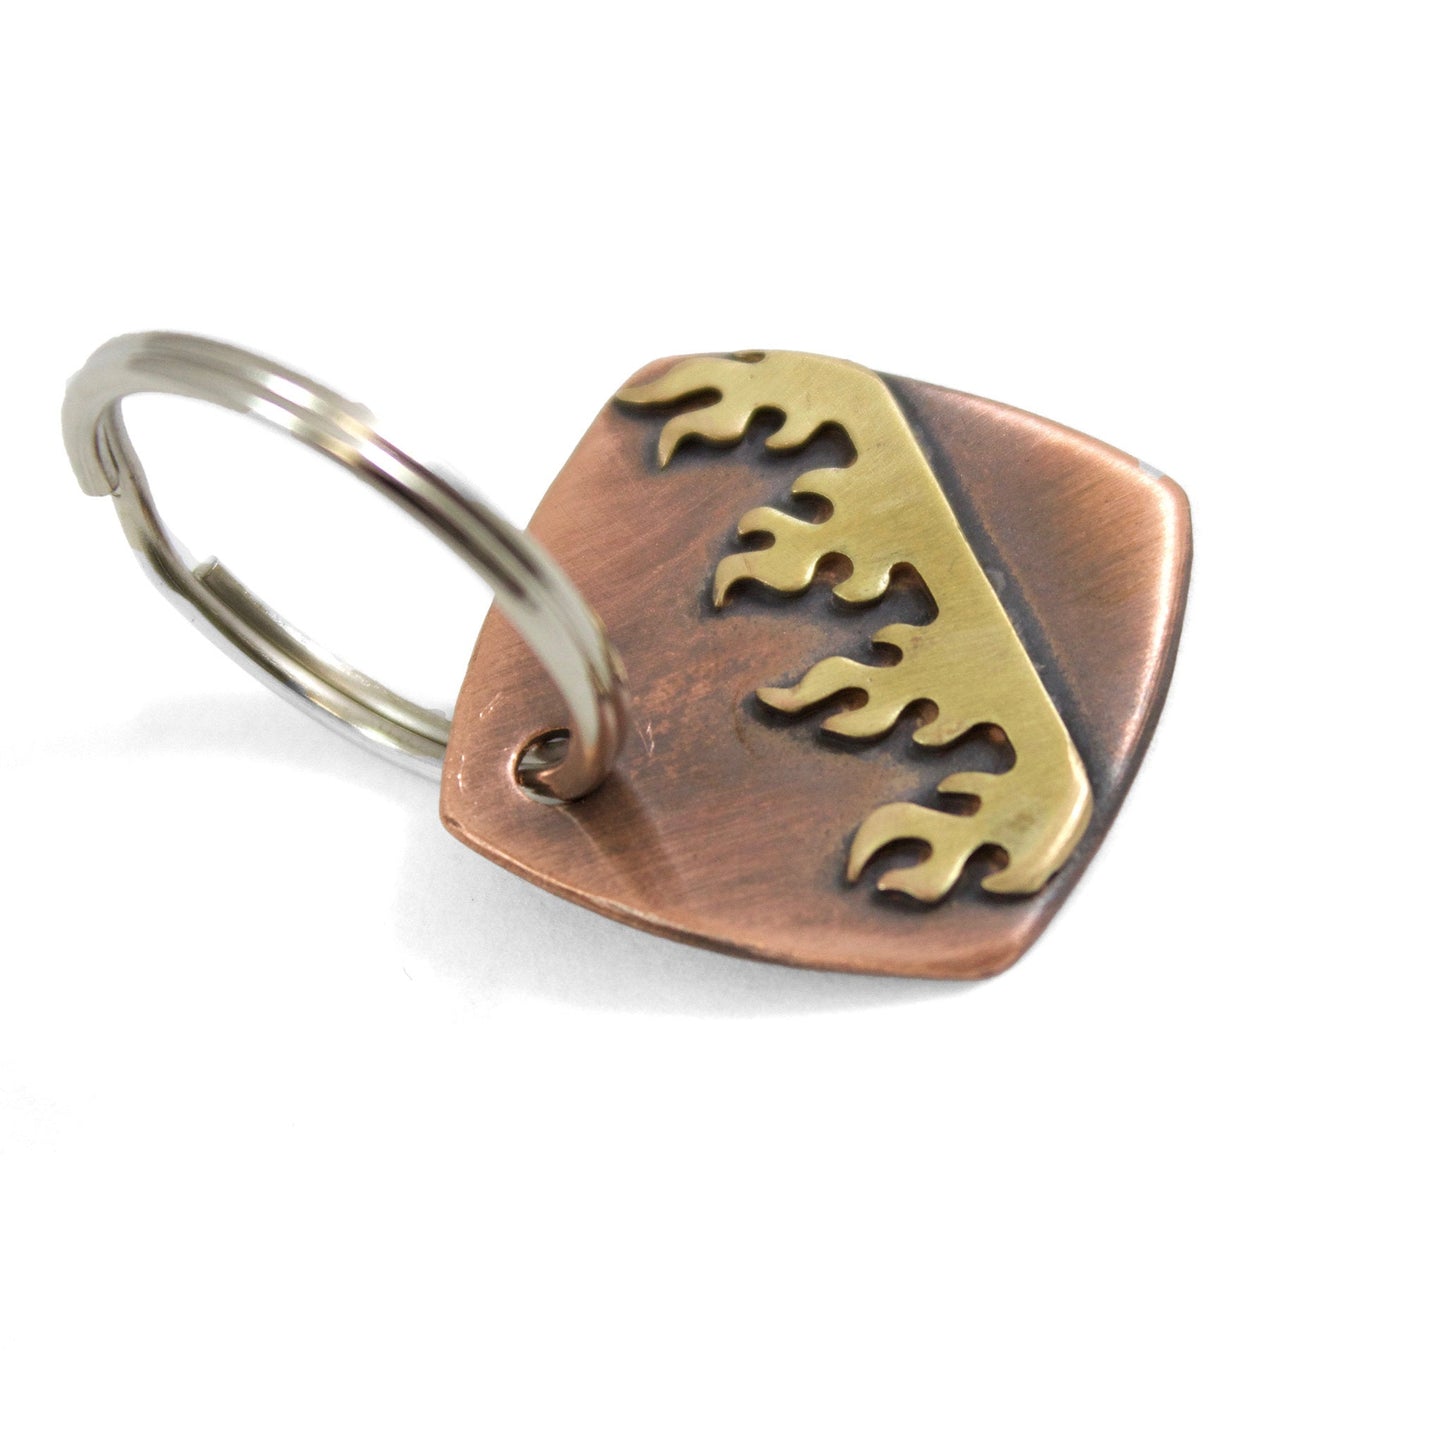 Copper keychain with flames design